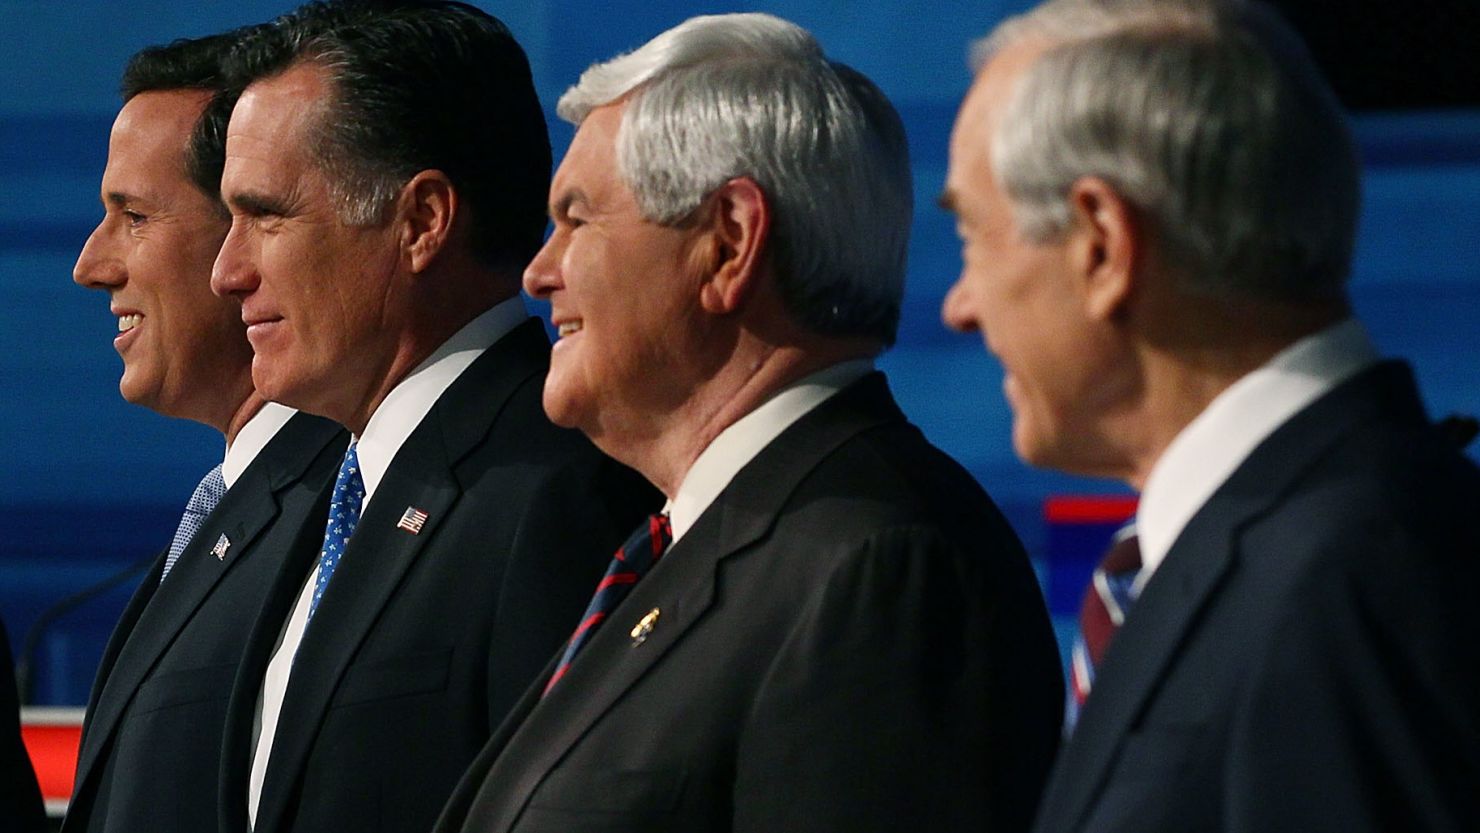 Republicans differed sharply on many issues in Monday's South Carolina debate.